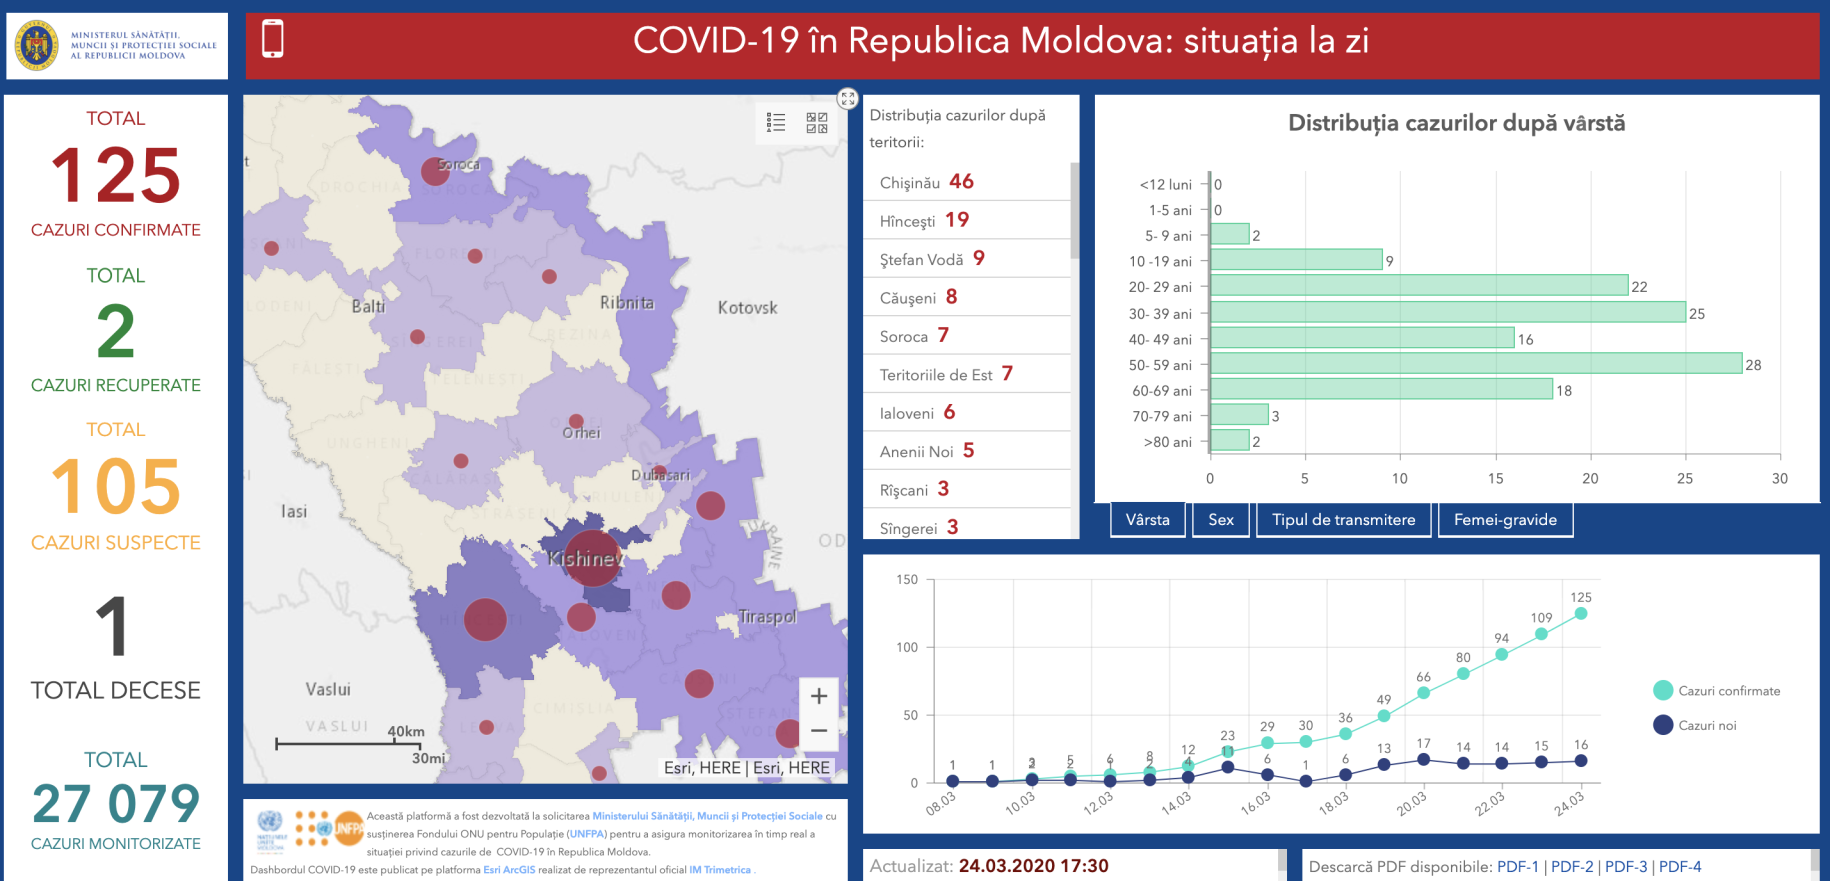 Shows the dashboard, which includes key figures, a map and graphs indicating the latest COVID-19 data.